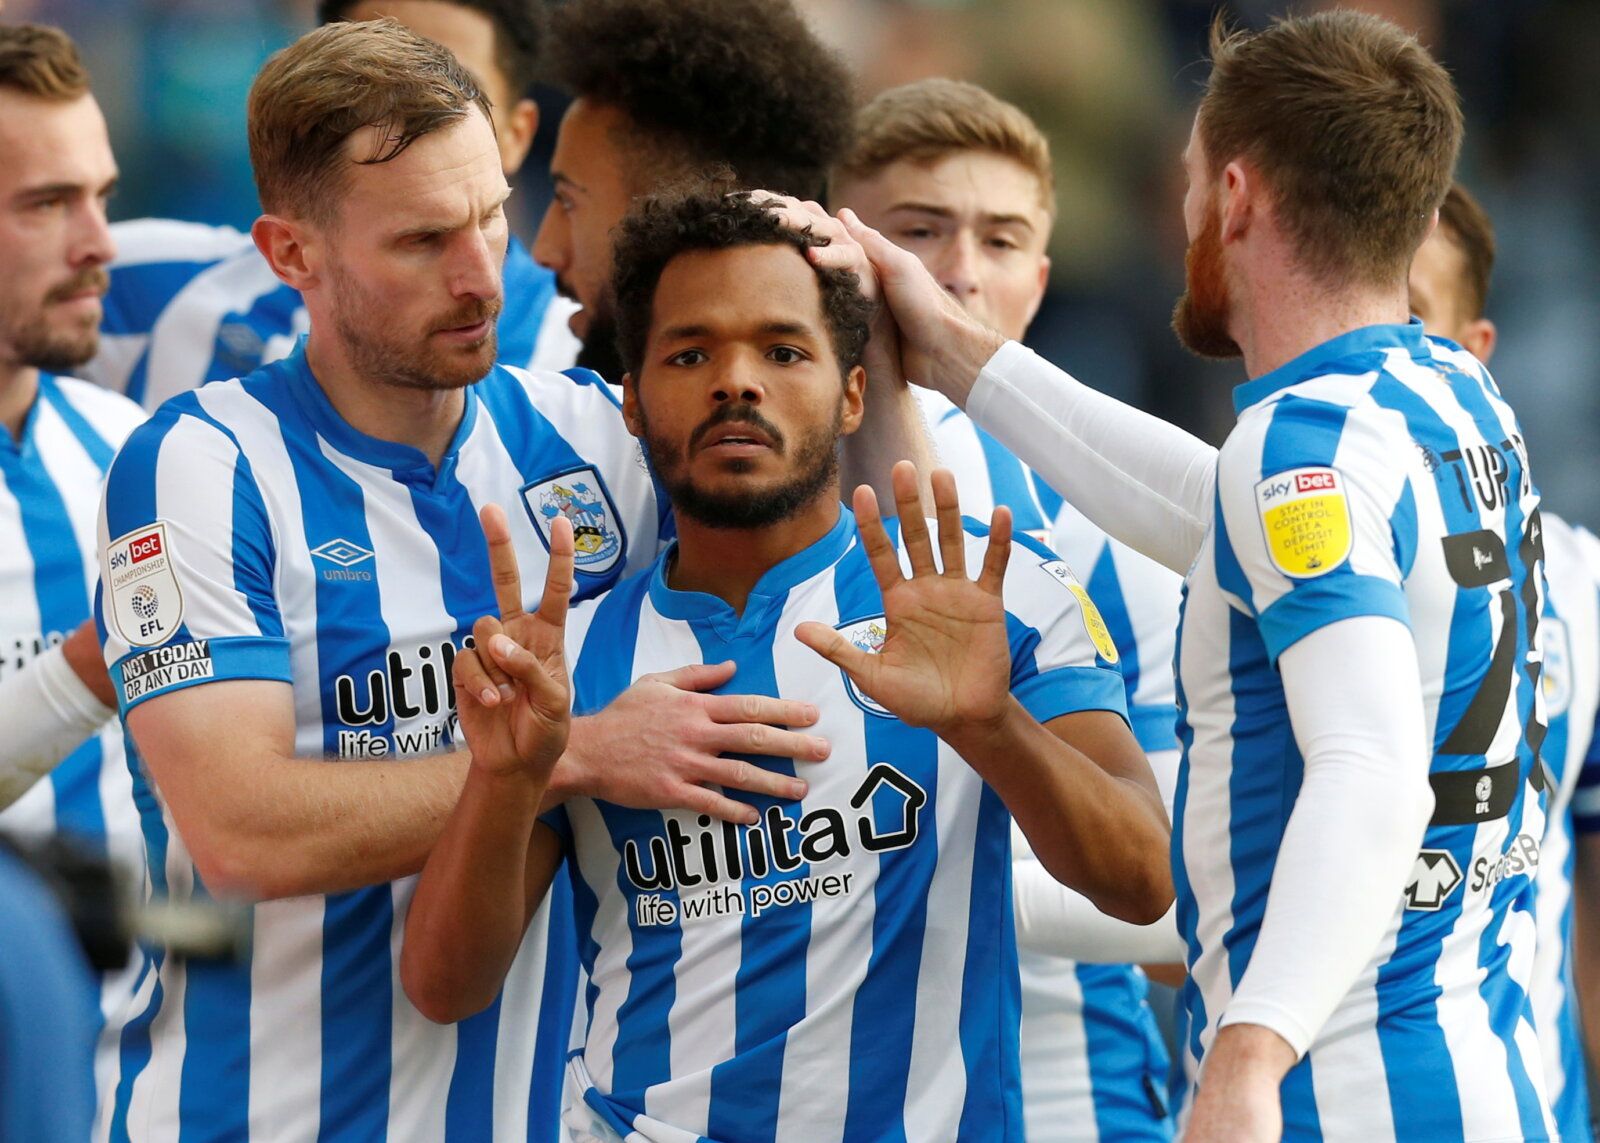 Soccer Football - Championship - Huddersfield Town v Hull City - John Smith's Stadium, Huddersfield, Britain - October 16, 2021 Huddersfield Town's Duane Holmes celebrates scoring their second goal with teammates   Action Images/Ed Sykes  EDITORIAL USE ONLY. No use with unauthorized audio, video, data, fixture lists, club/league logos or 